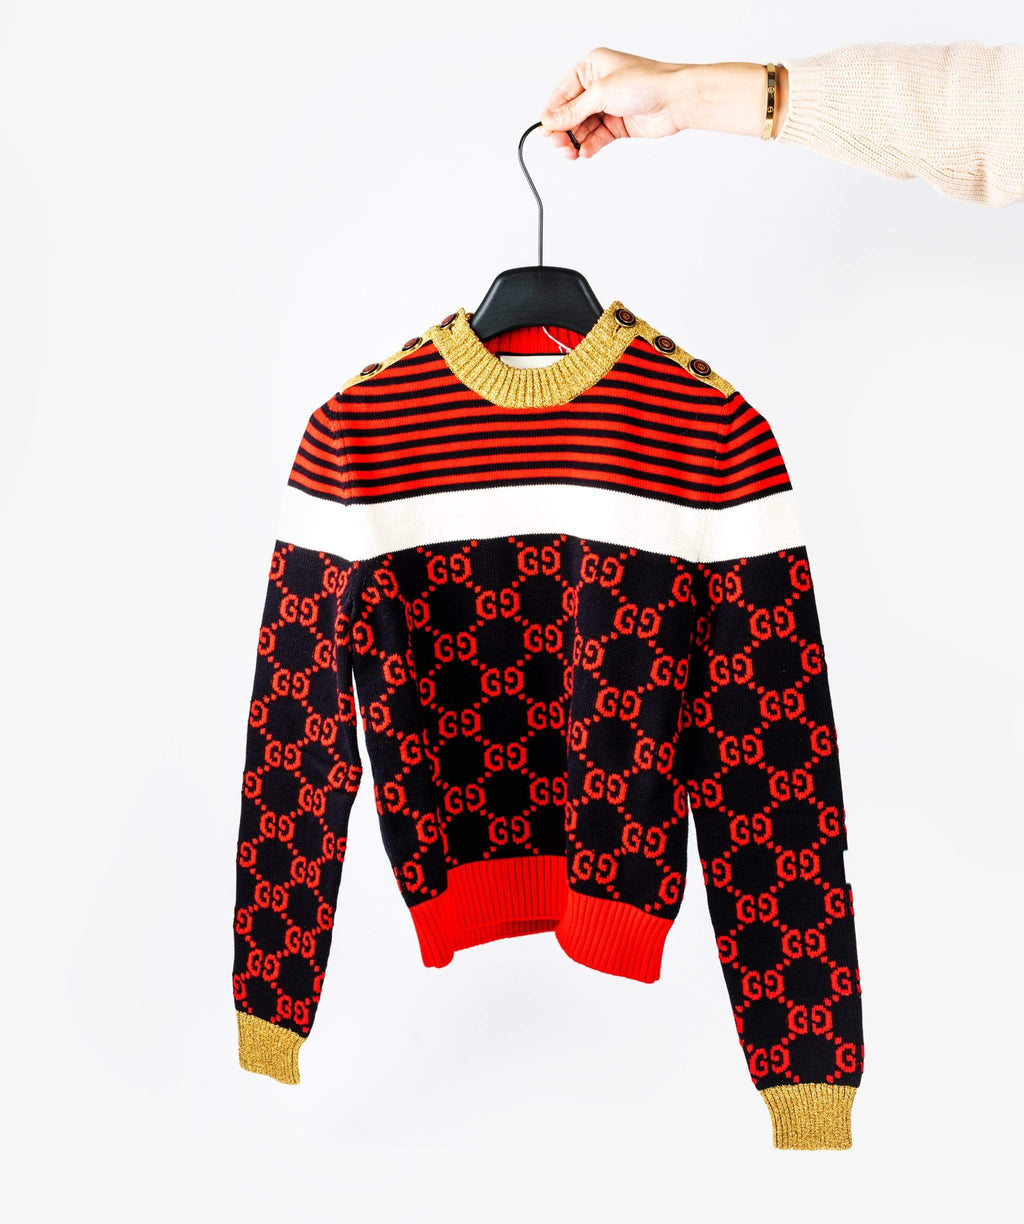 Louis Vuitton x Supreme - Authenticated Sweatshirt - Cotton Red for Men, Never Worn, with Tag